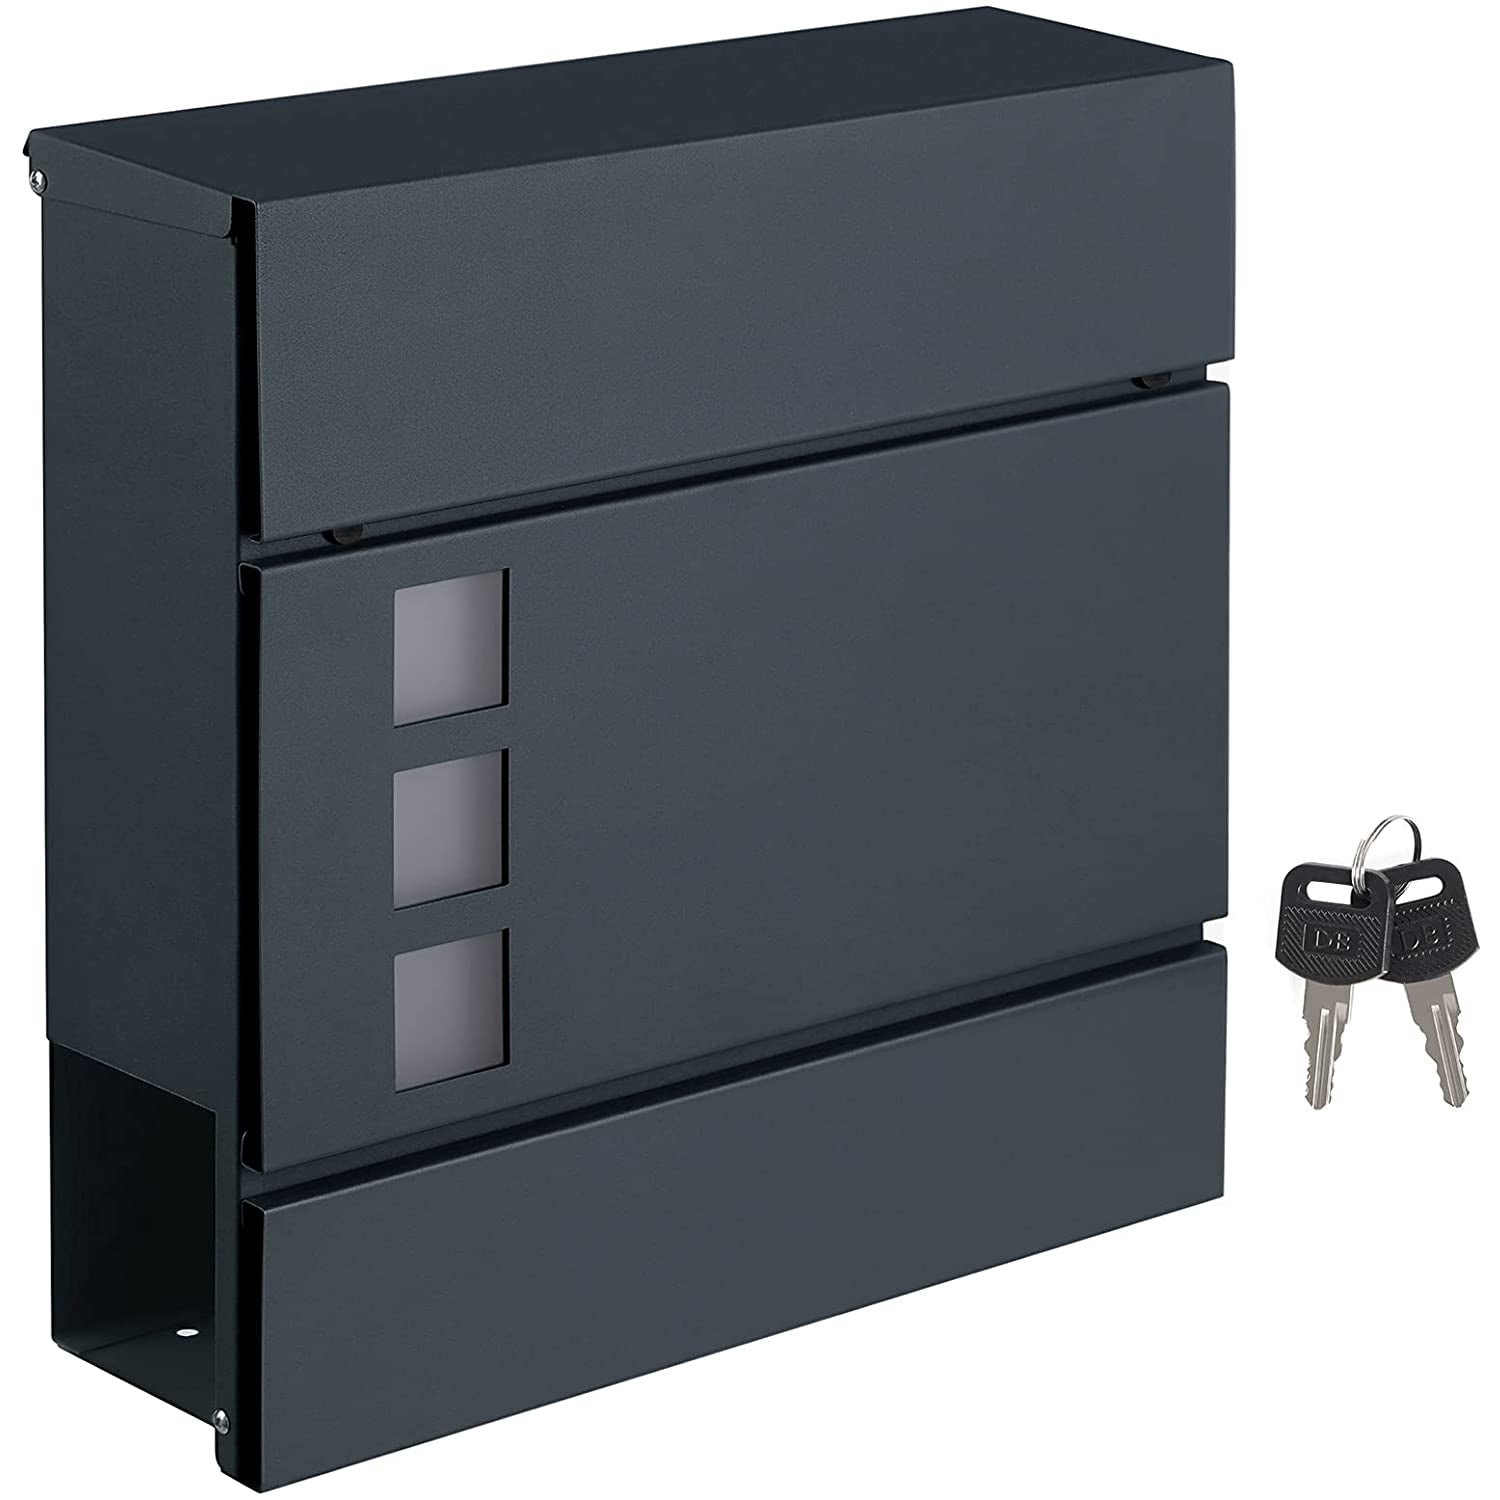 Nancy's Fordwich Letterbox - Wall-mounted letterbox - Wall mounting - Lockable - Newspaper compartment - Anthracite-Metal - 37 x 10.5 x 37 cm